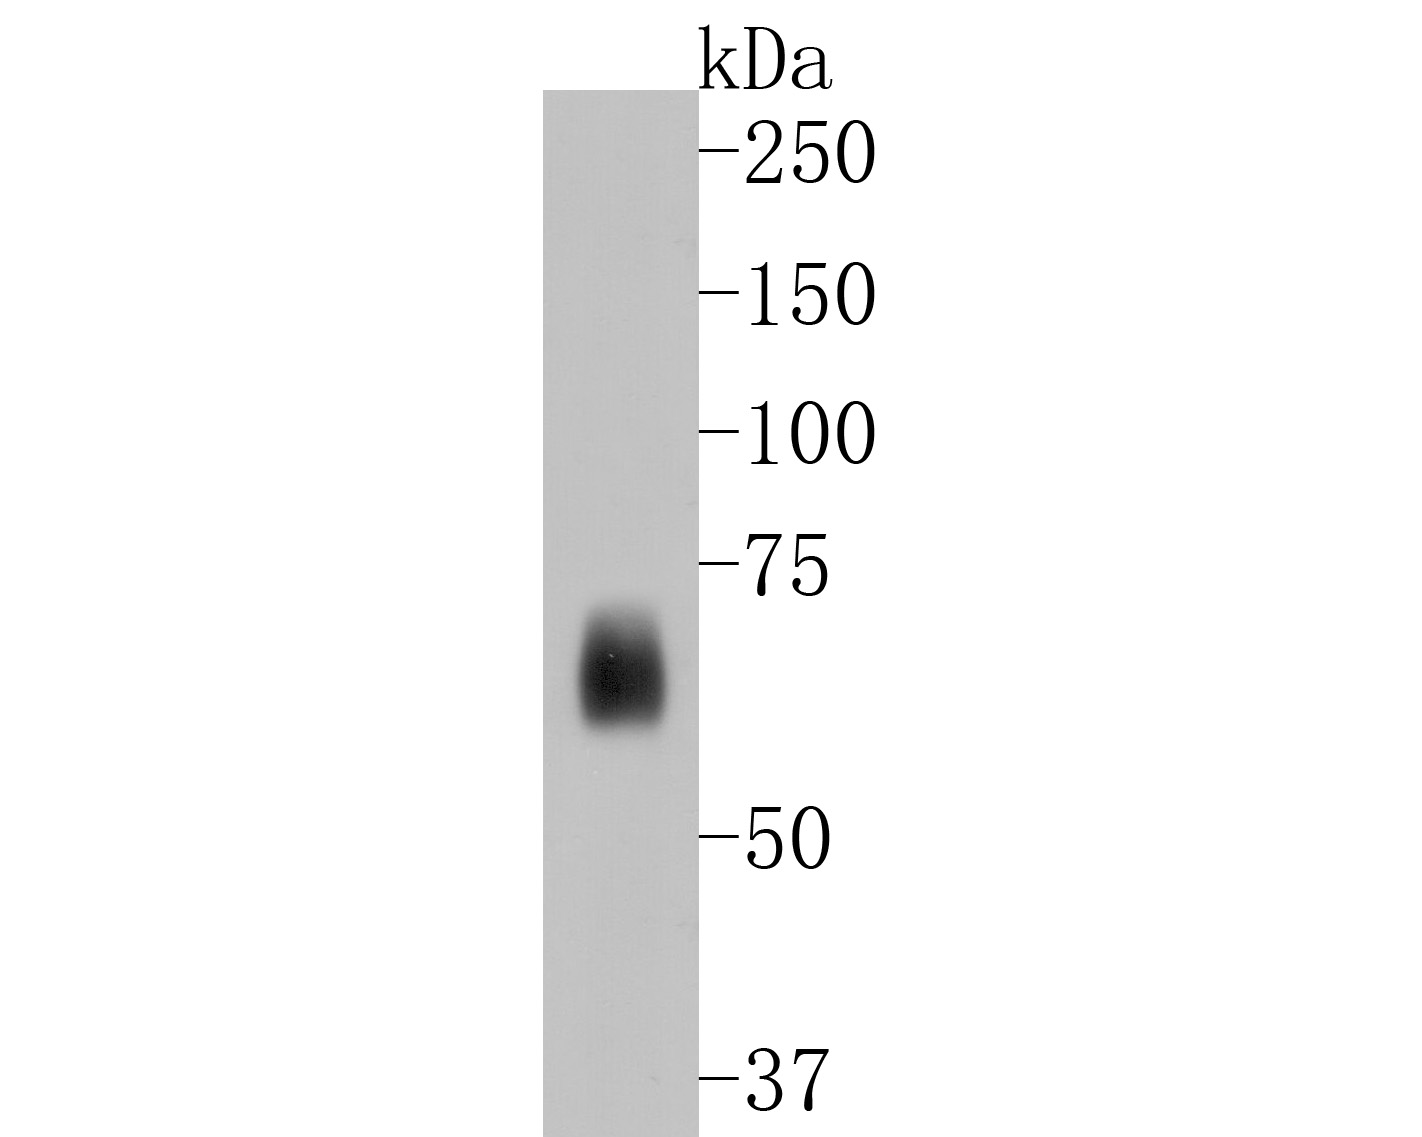 Western blot analysis of Kv1.1 potassium channel on human brain tissue lysates. Proteins were transferred to a PVDF membrane and blocked with 5% BSA in PBS for 1 hour at room temperature. The primary antibody (ET1611-7, 1/500) was used in 5% BSA at room temperature for 2 hours. Goat Anti-Rabbit IgG - HRP Secondary Antibody (HA1001) at 1:5,000 dilution was used for 1 hour at room temperature.